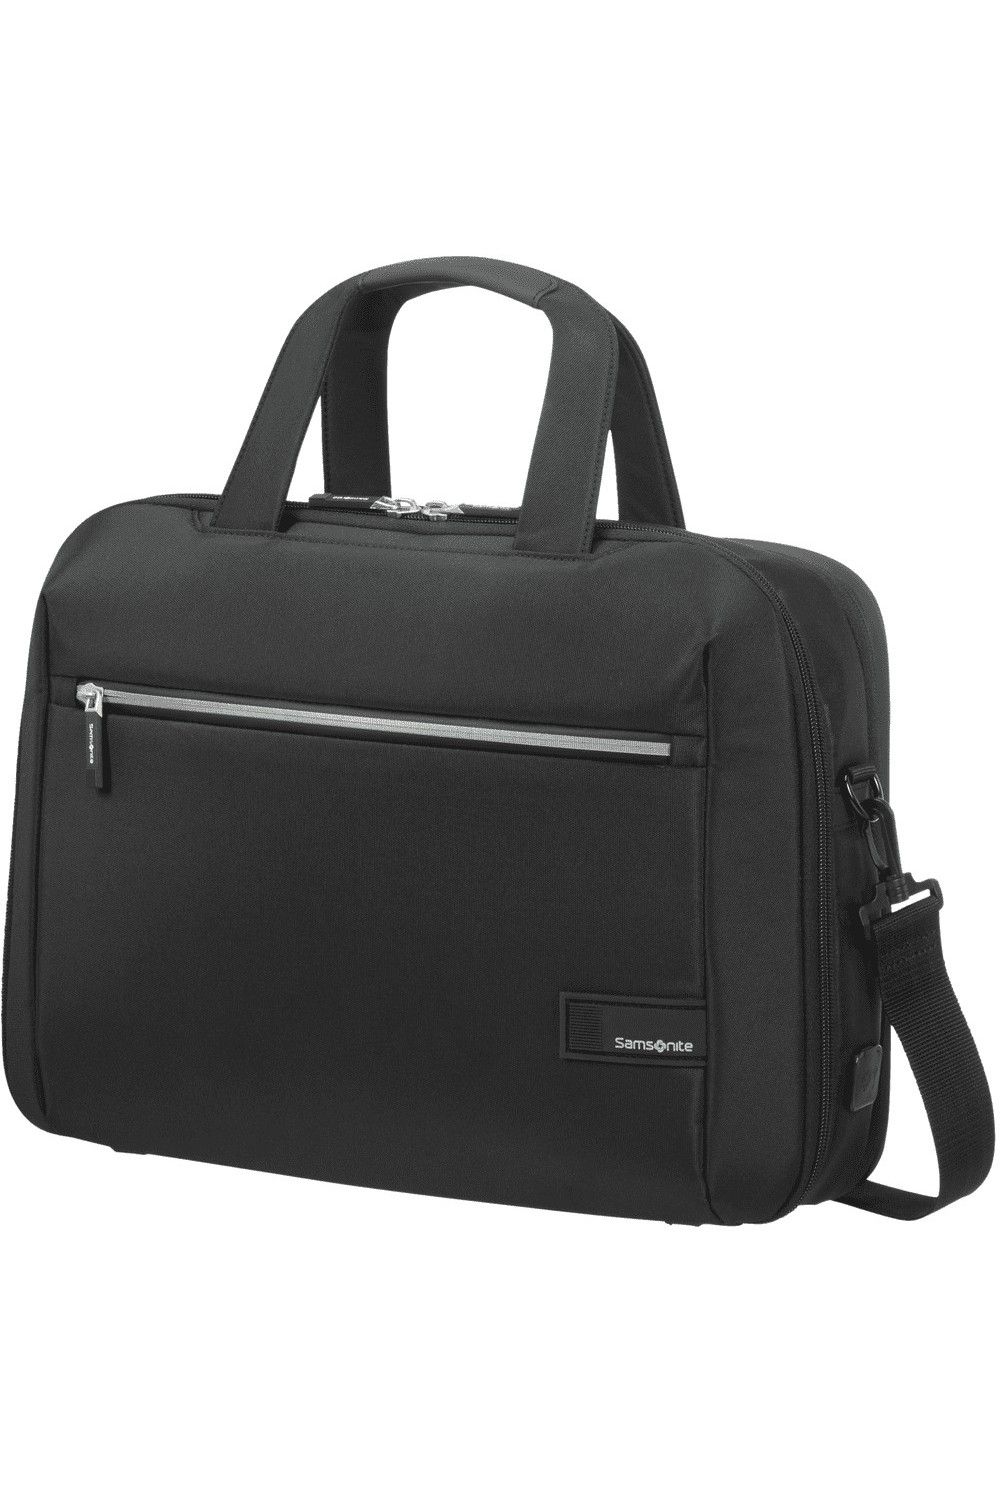 Samsonite Litepoint laptop bags 15.6 inches